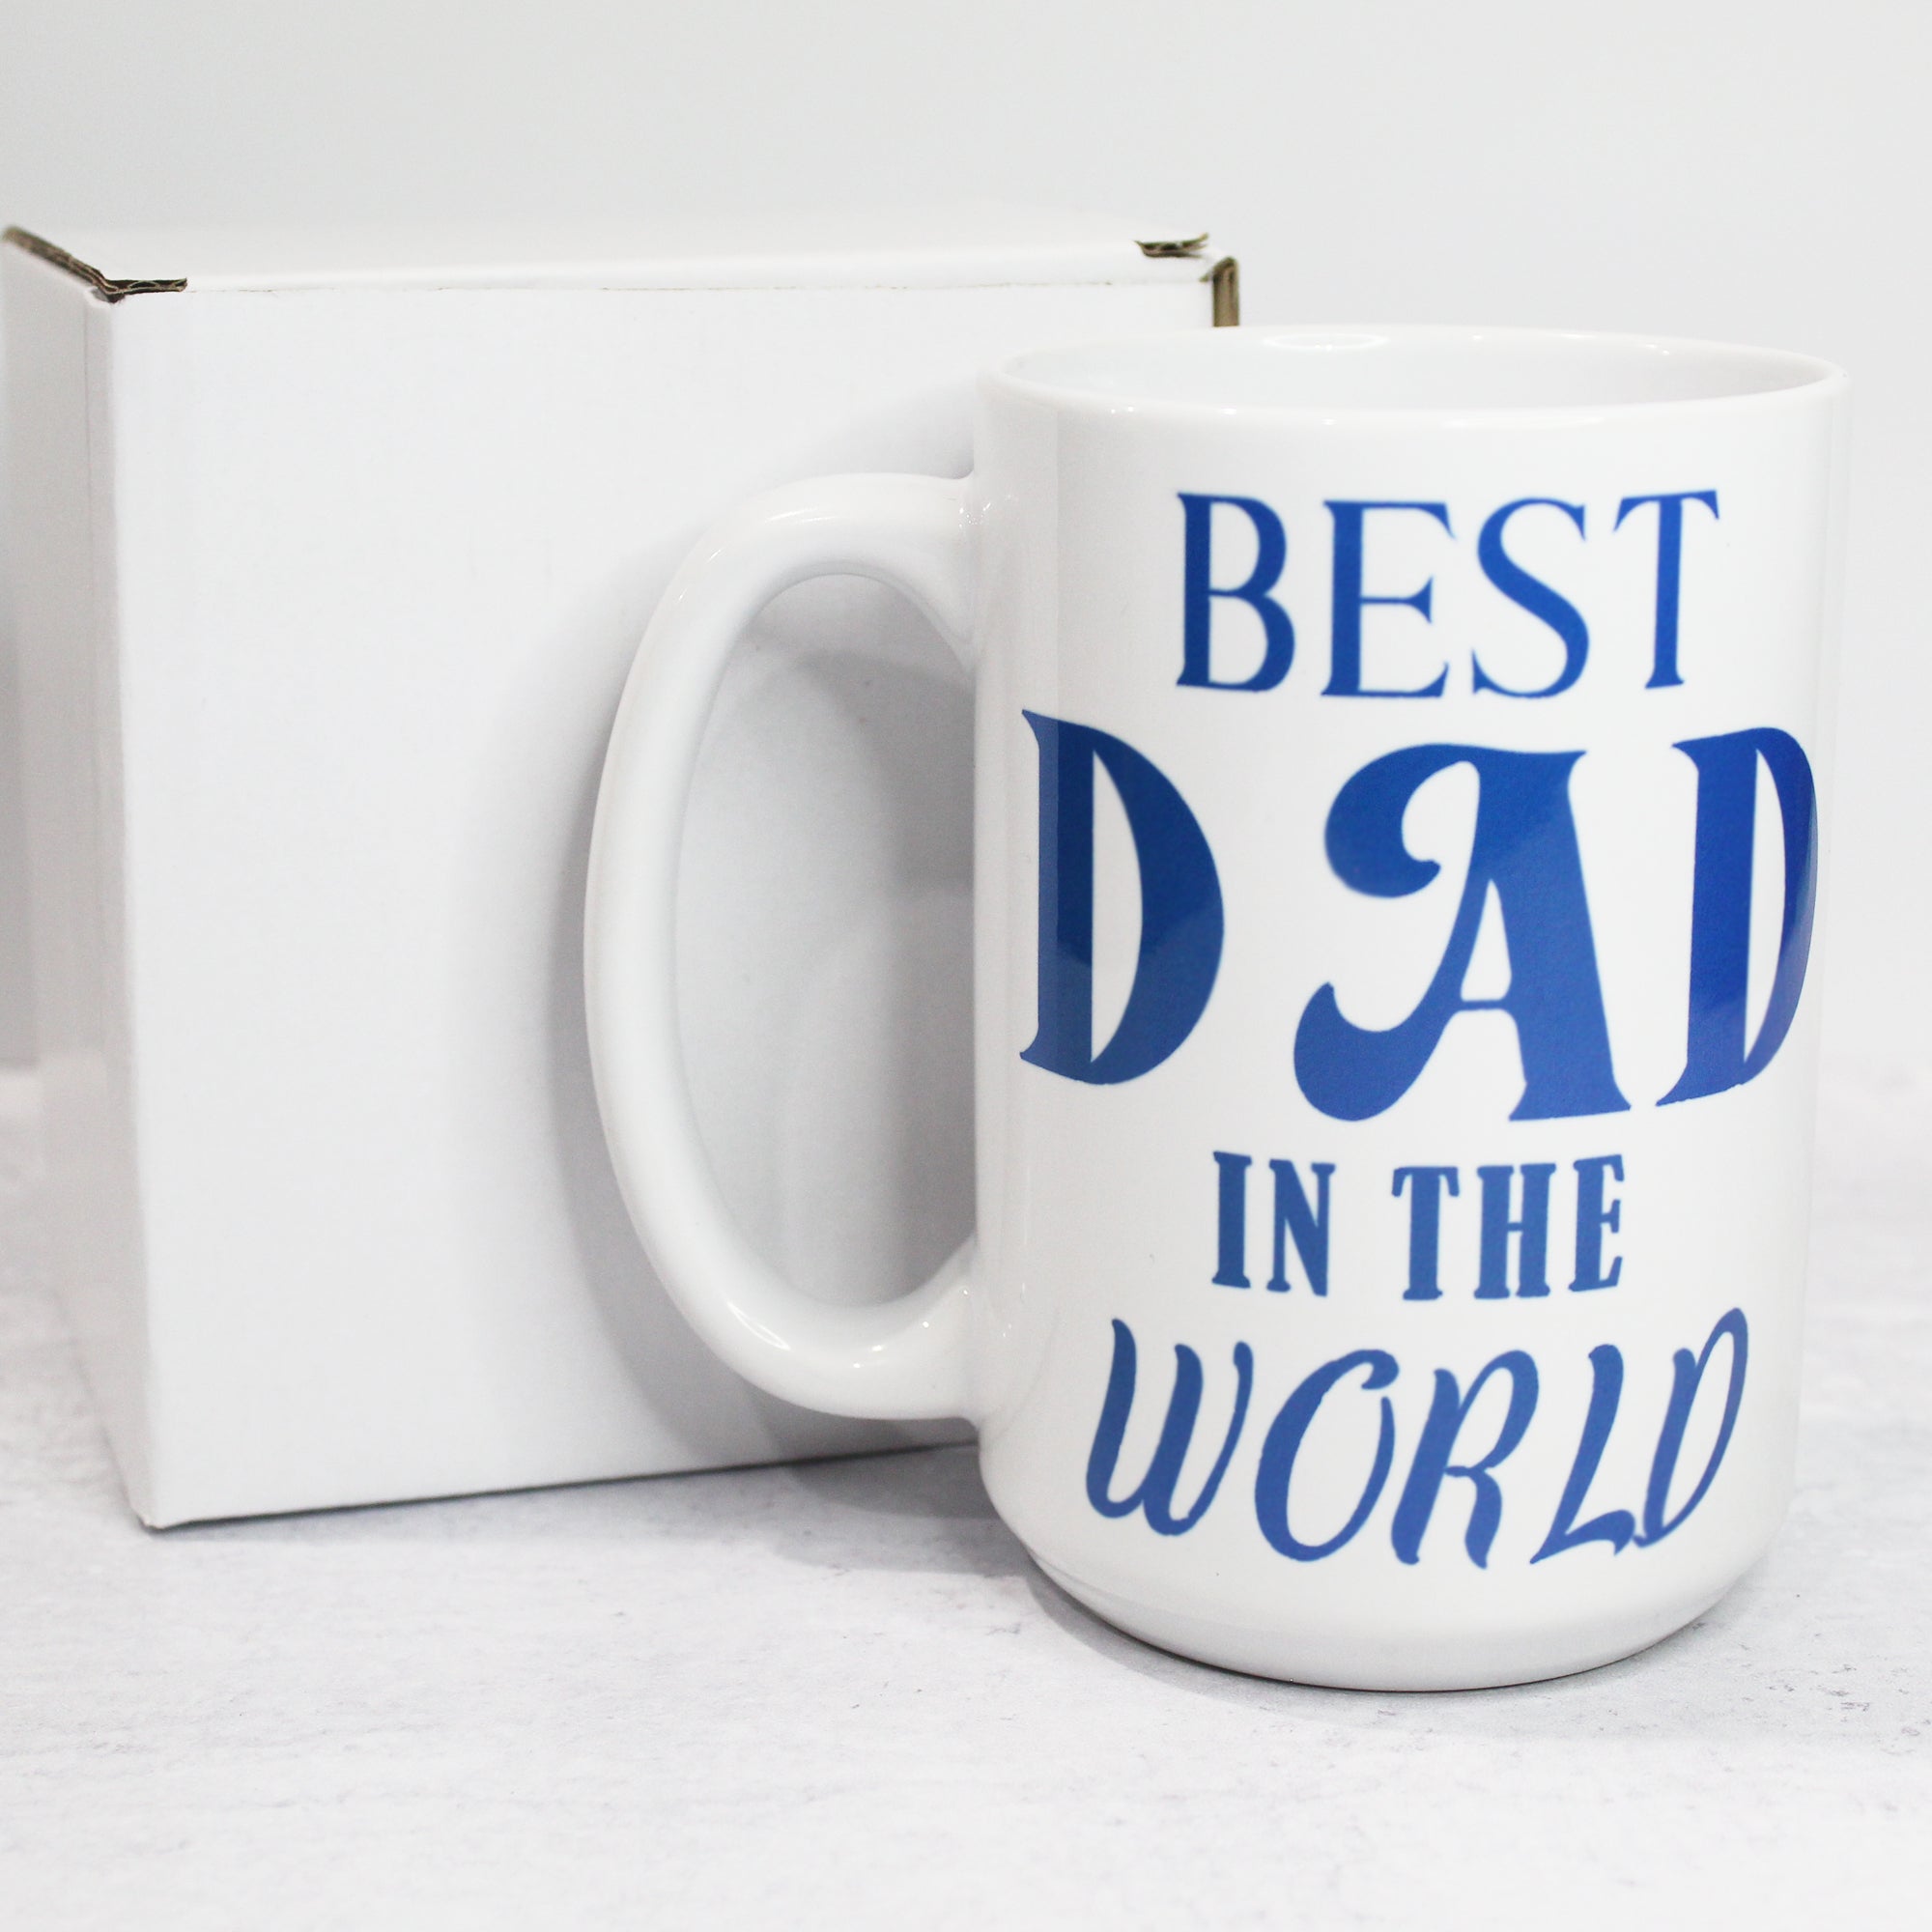 The Best Dad In The World Coffee Mugs, 15 oz Coffee Mugs, Fathers Day Coffee Cups, Men Coffee Mugs, Novelty Mugs - Packaging